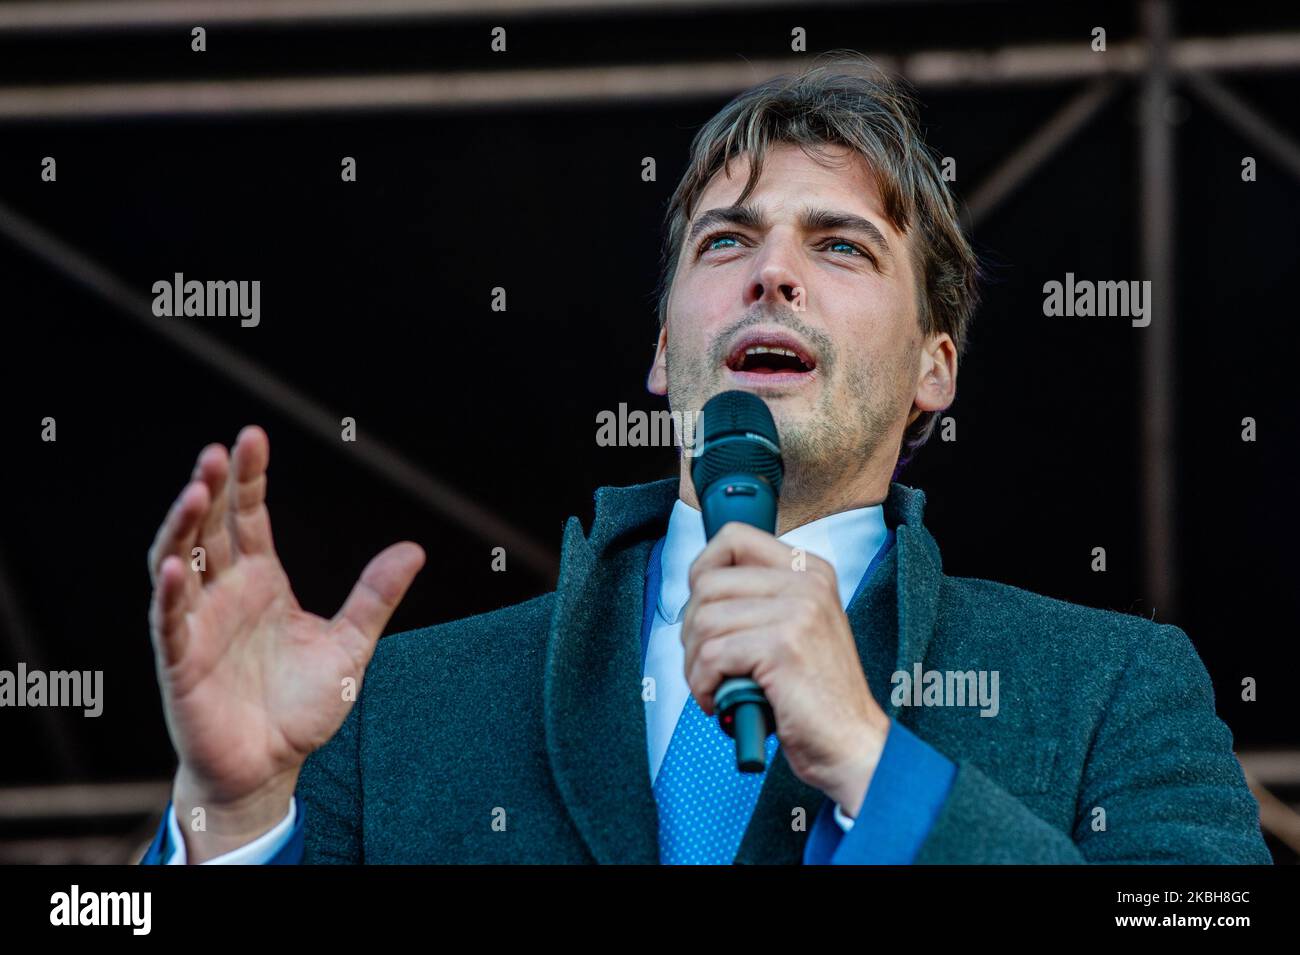 Therry Baudet, leader of the right wing political party FVD is giving a speech, during the new protest campaign by the Dutch farmers, in The Hague, on February 19, 2020. (Photo by Romy Arroyo Fernandez/NurPhoto) Stock Photo